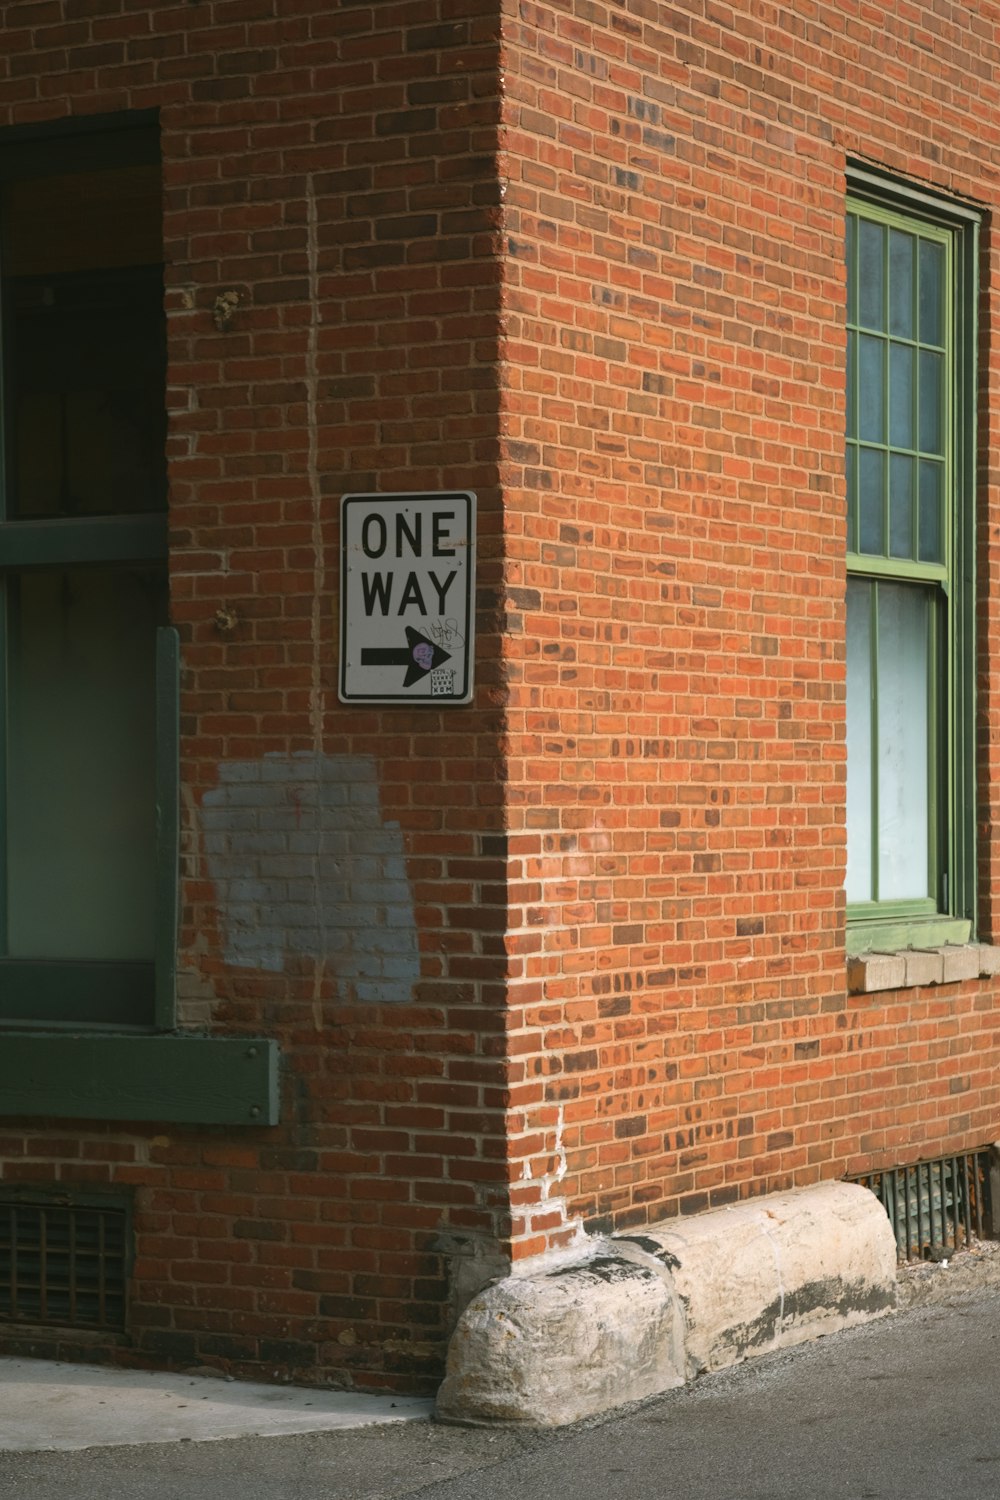 a brick building with a one way sign on it